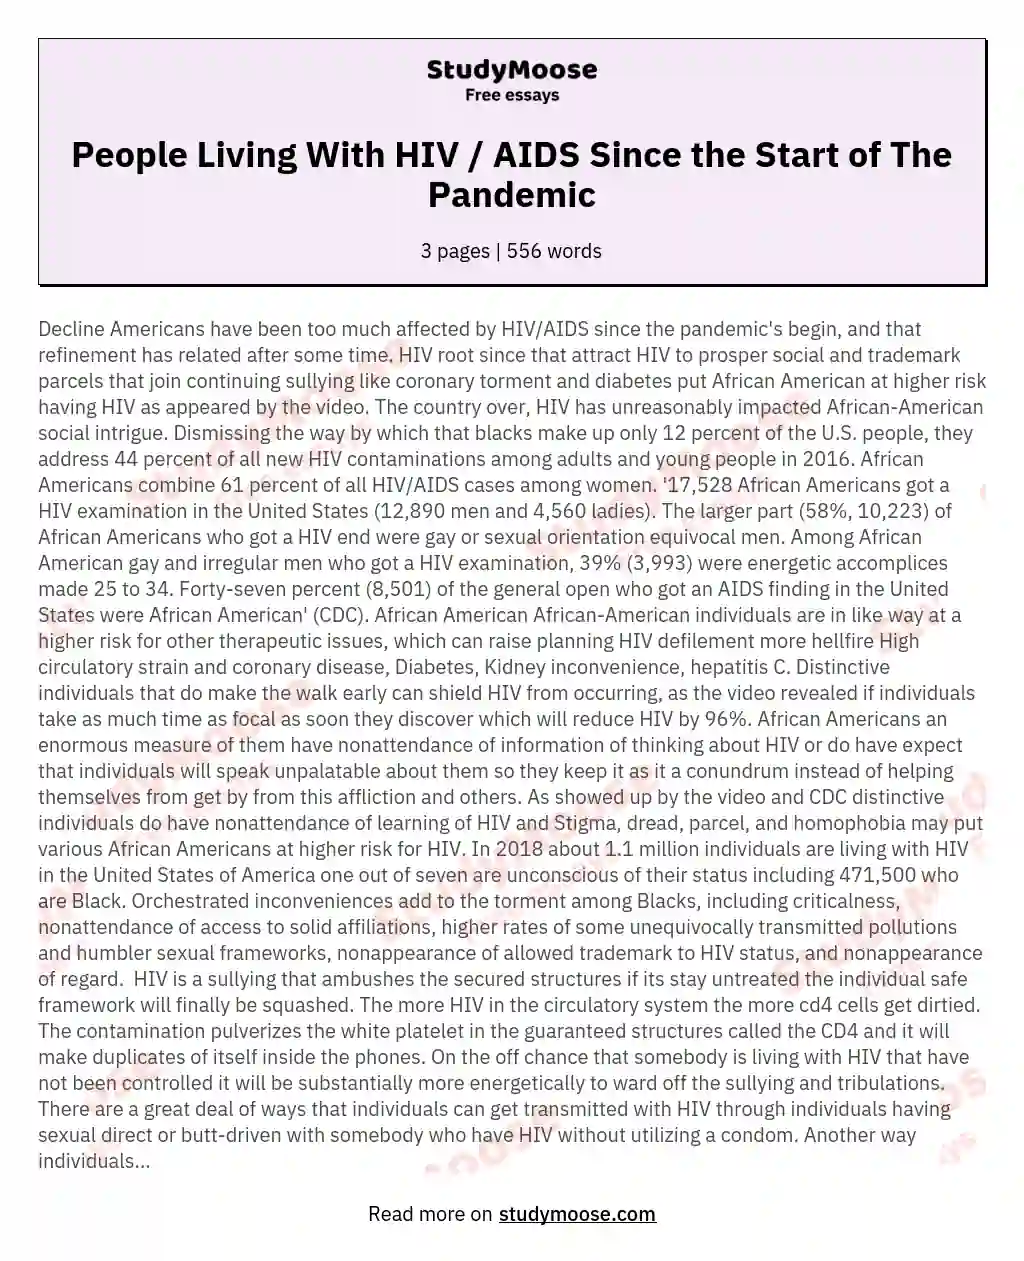 People Living With HIV / AIDS Since the Start of The Pandemic essay